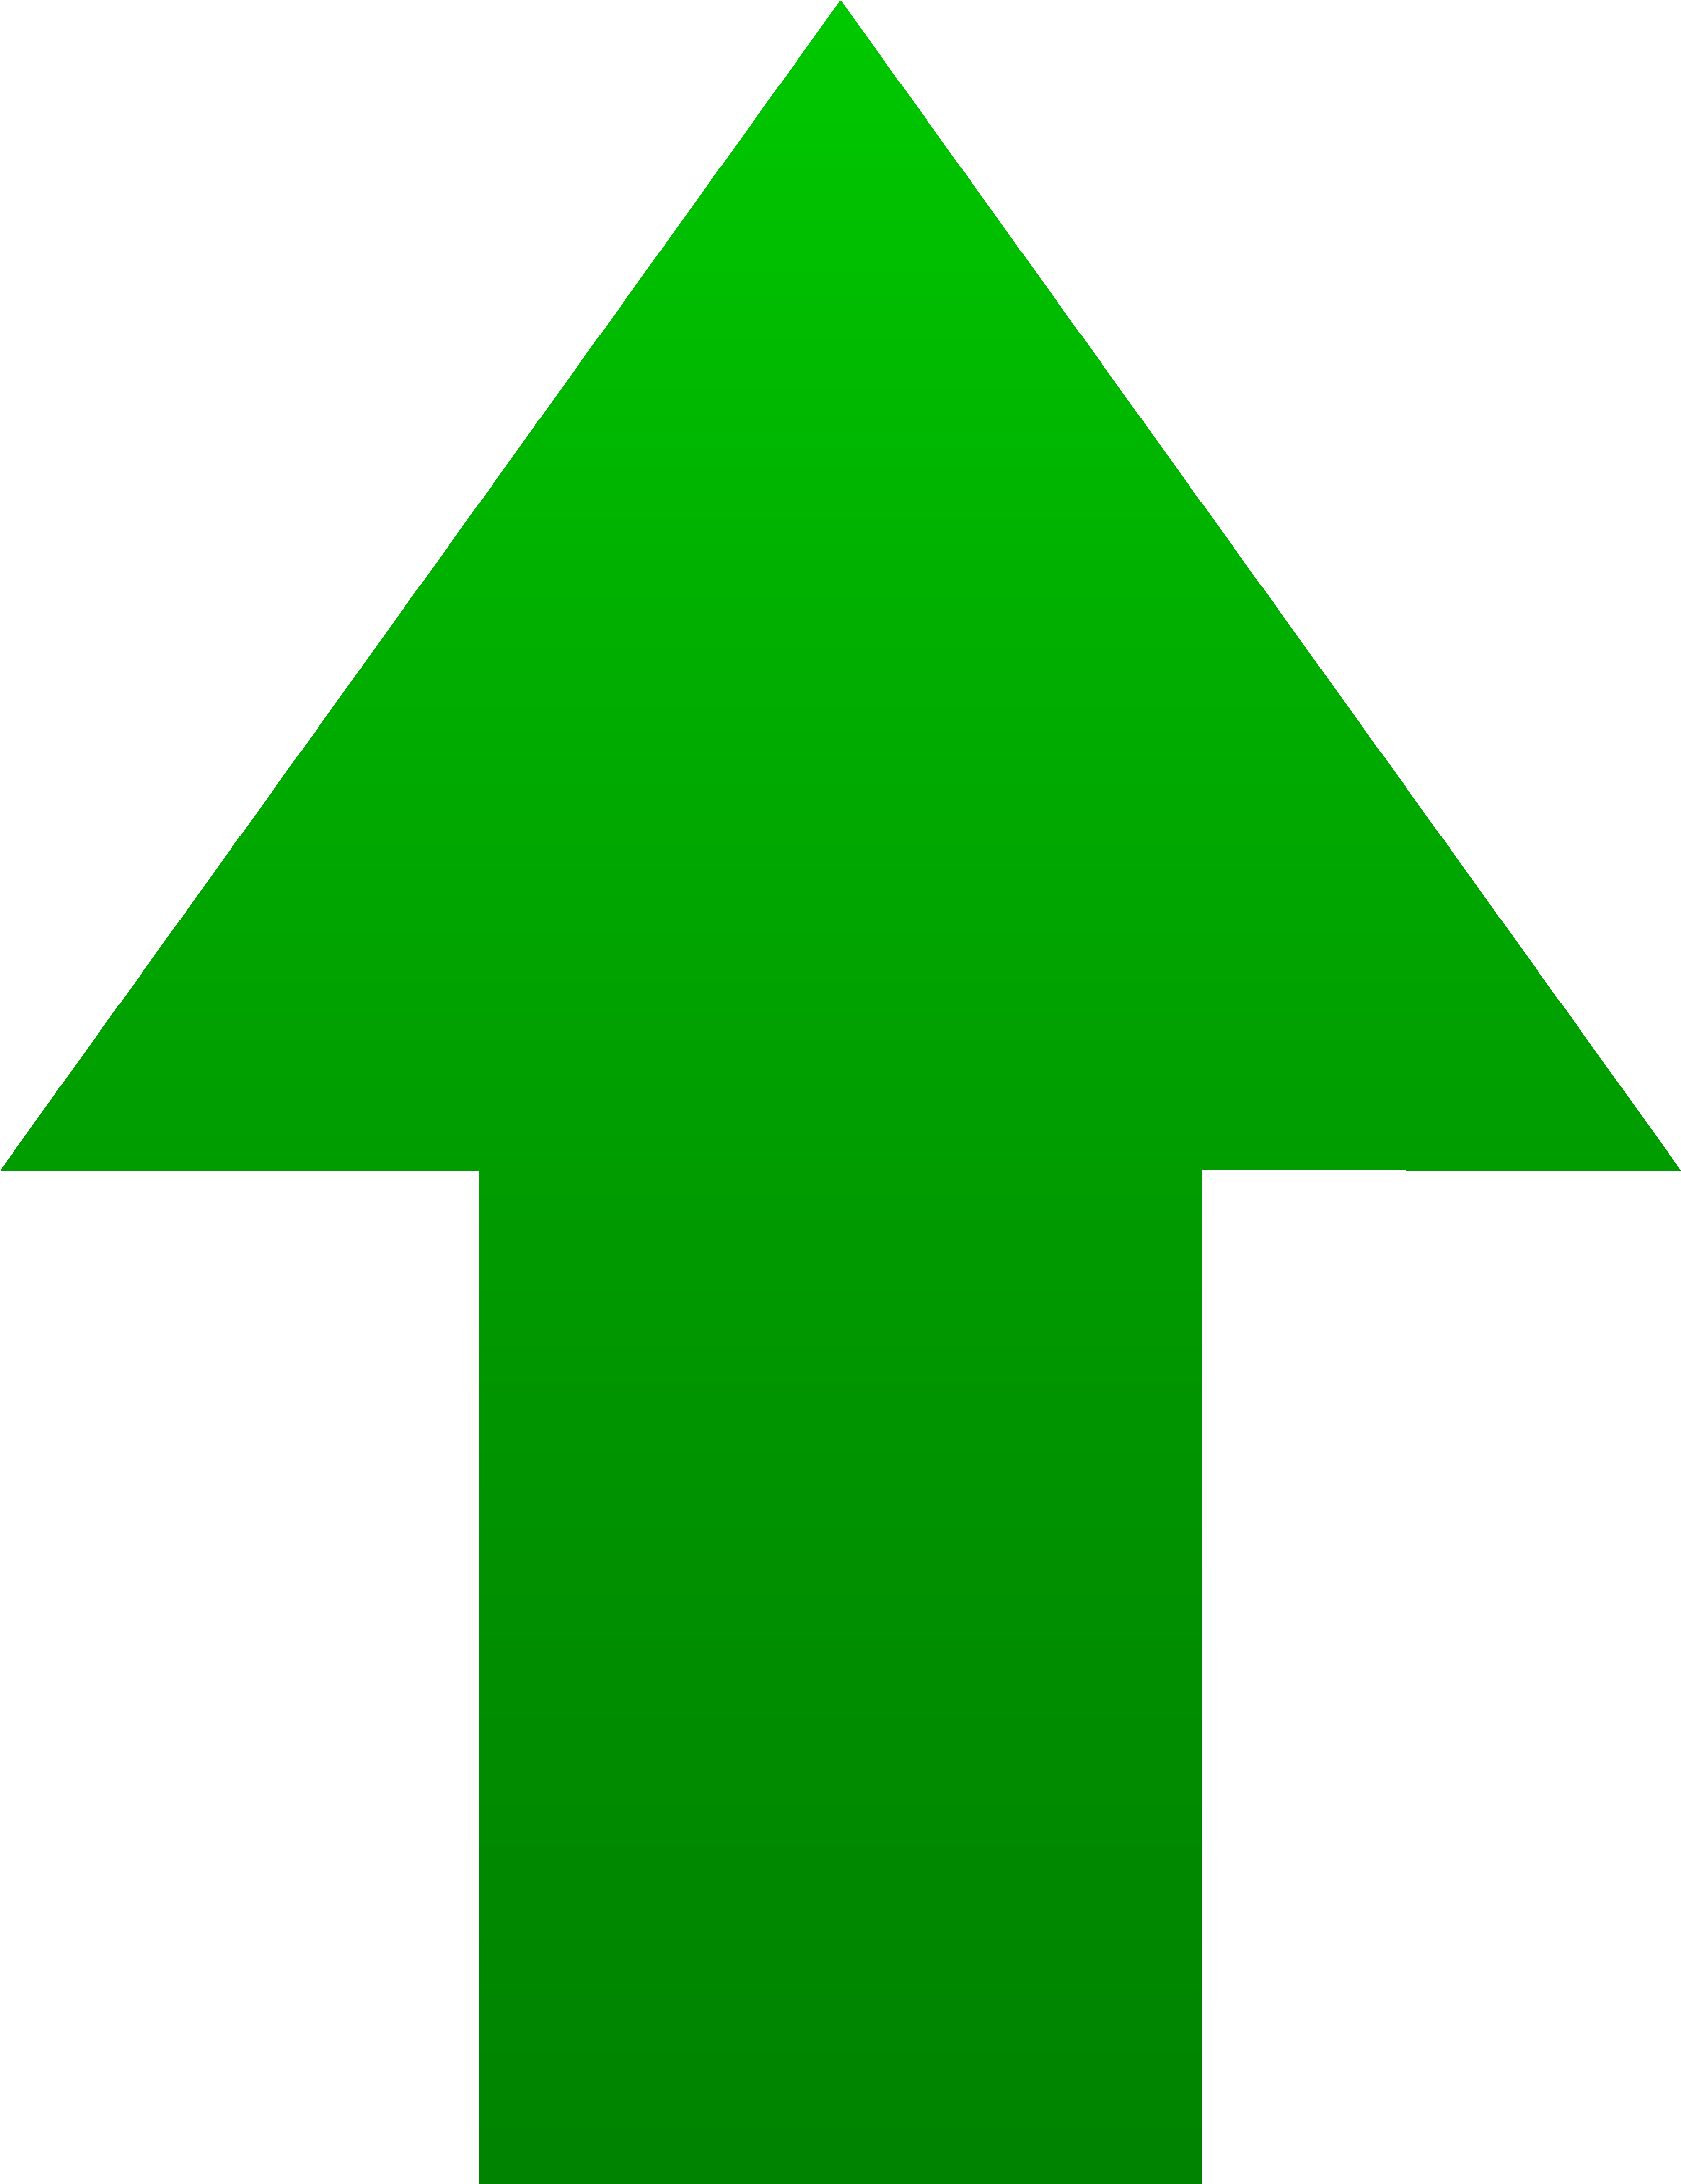 Notched Arrow Icon - Green Arrow Icon Png (3525x4343)